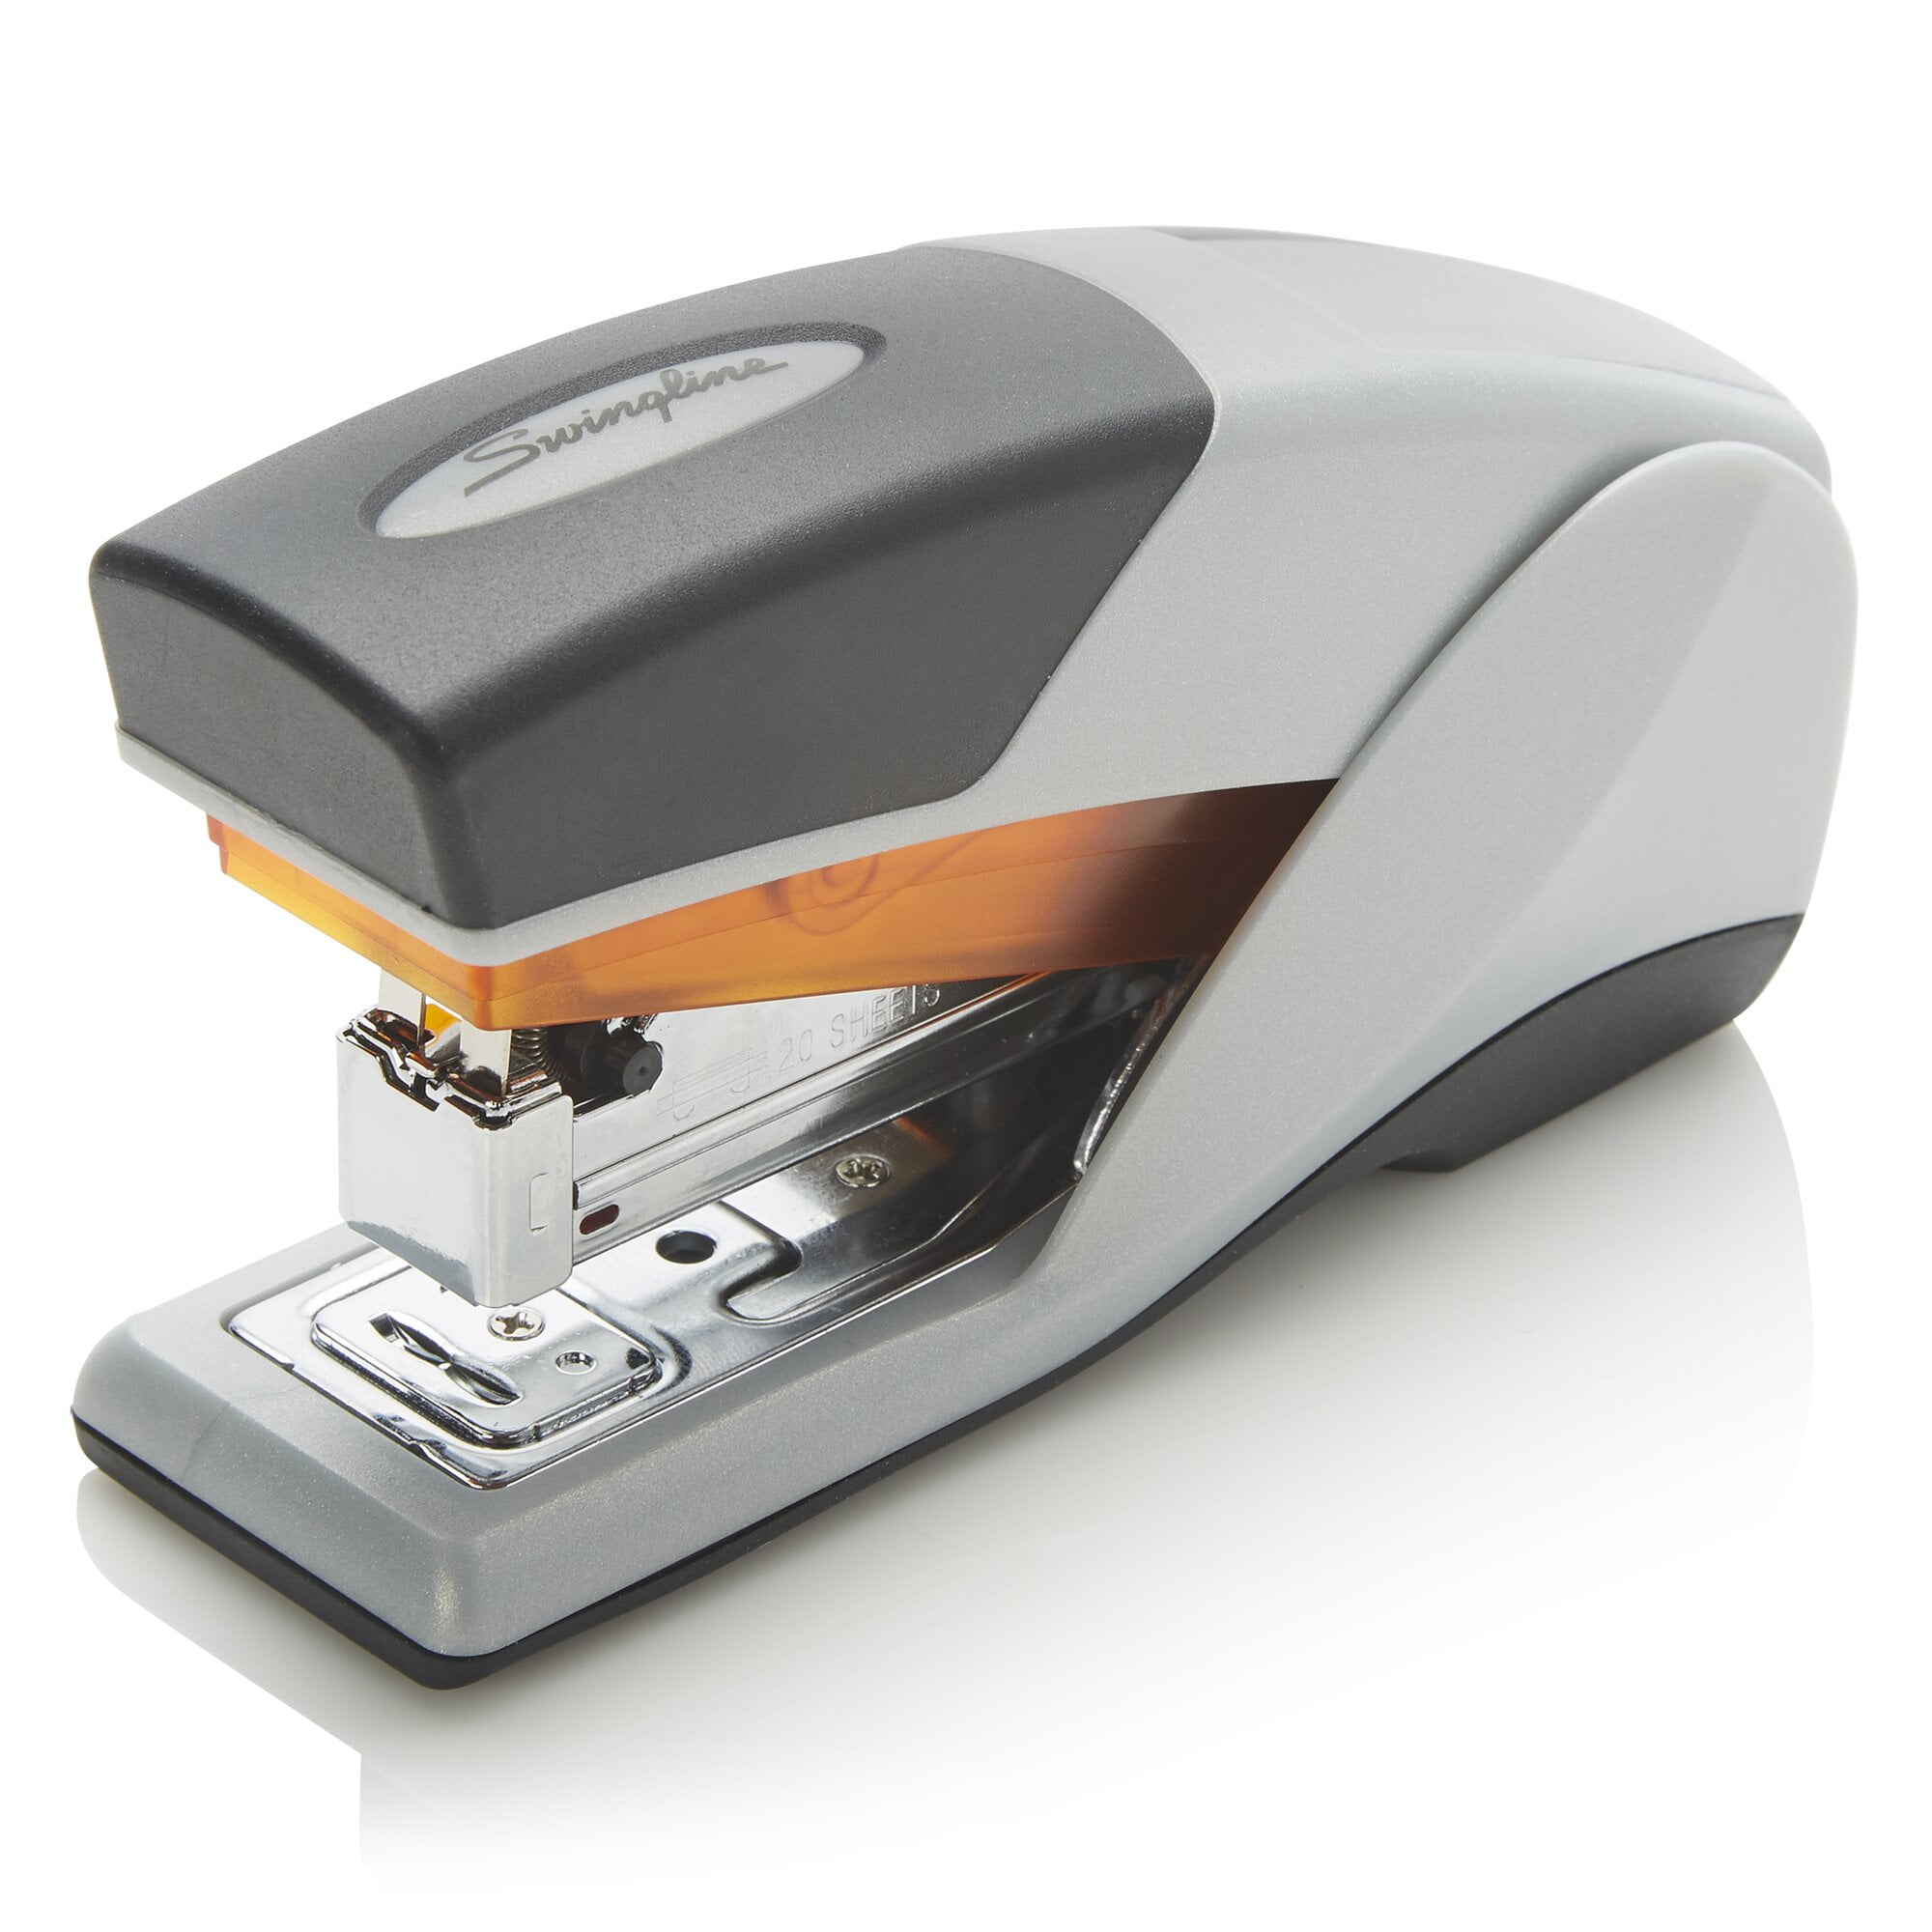 Optima 40 Black / Si 40 Sheets Capacity Low Force Compact Details about   Swingline Stapler 